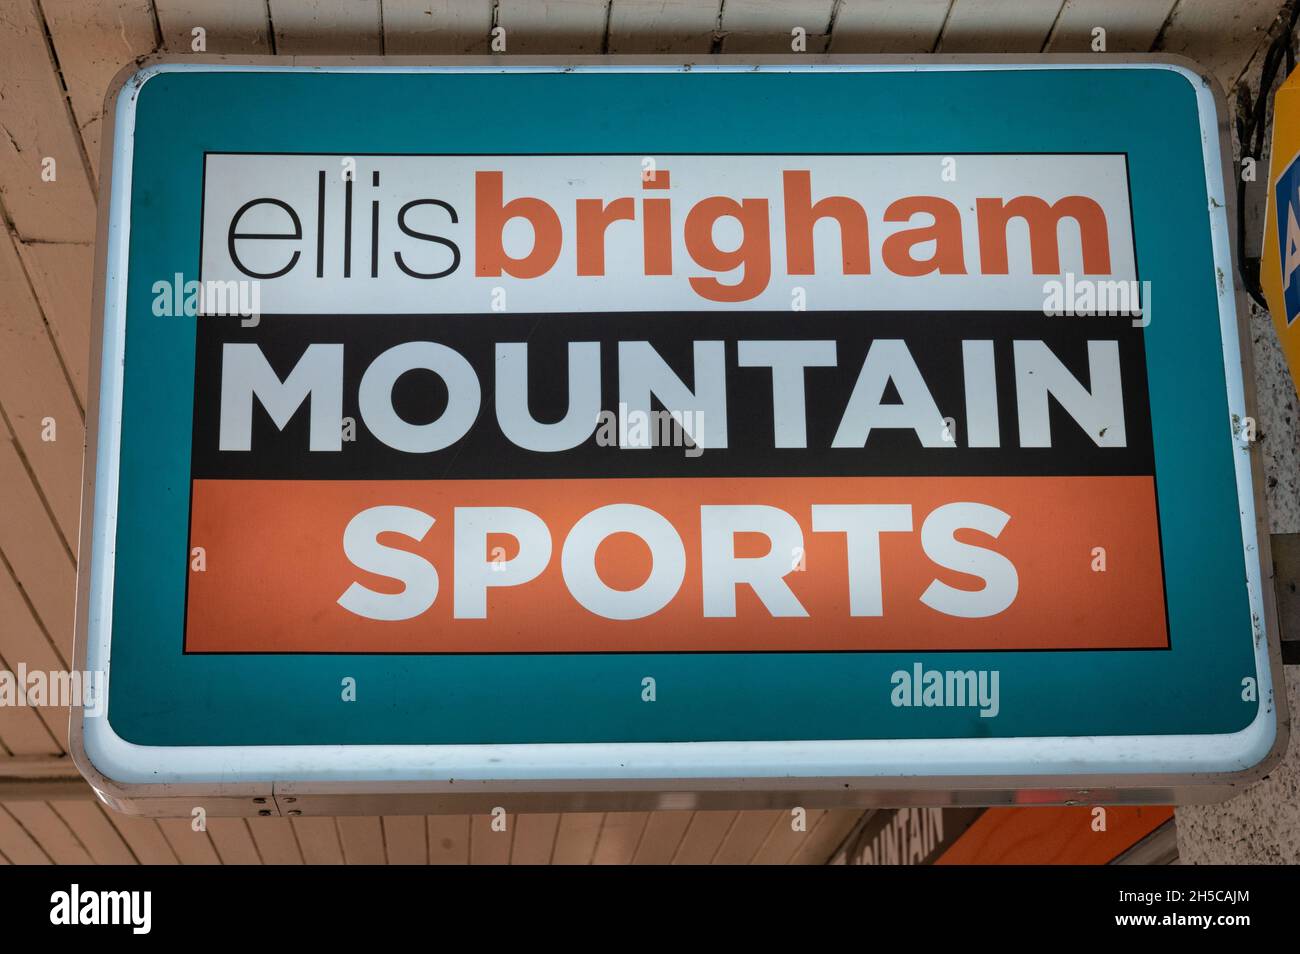 Aviemore, Scotland- Oct 18, 2021: The sign for the Ellis Brigham Mountain Sports store in Aviemore Stock Photo